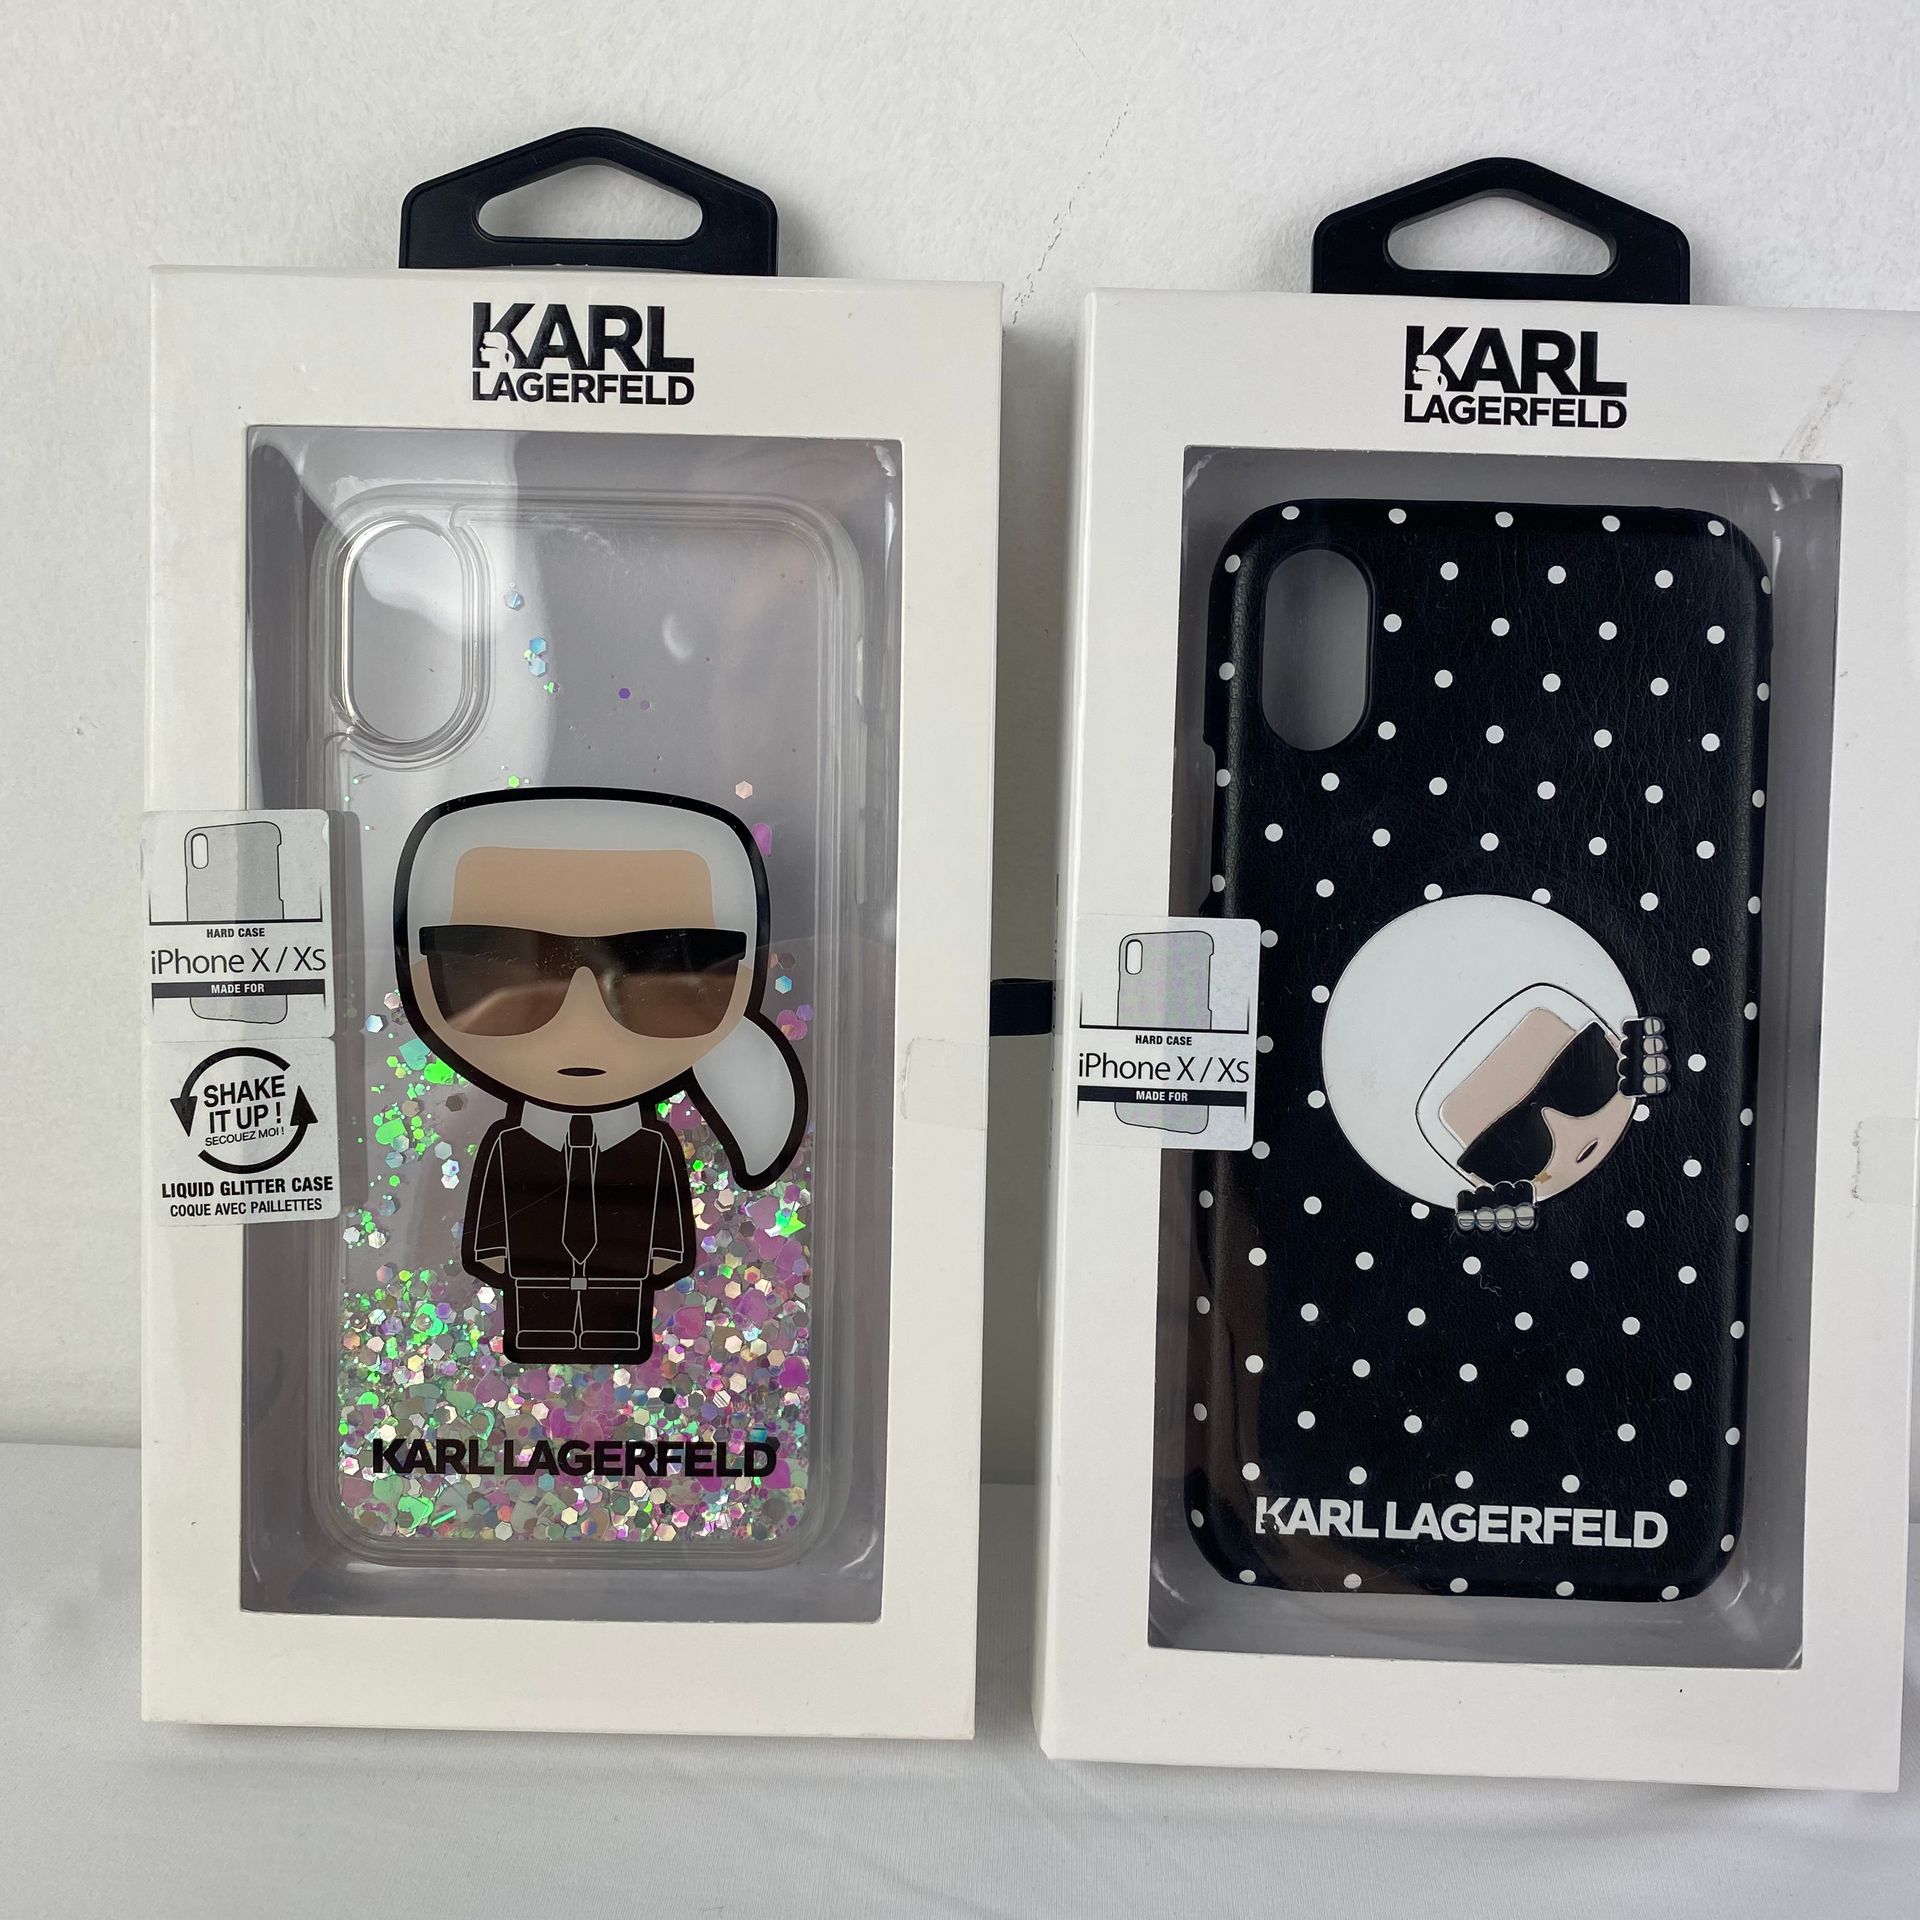 Karl LAGERFELD Lot de 2 coques pour Iphone X/Xs Karl Lagerfeld